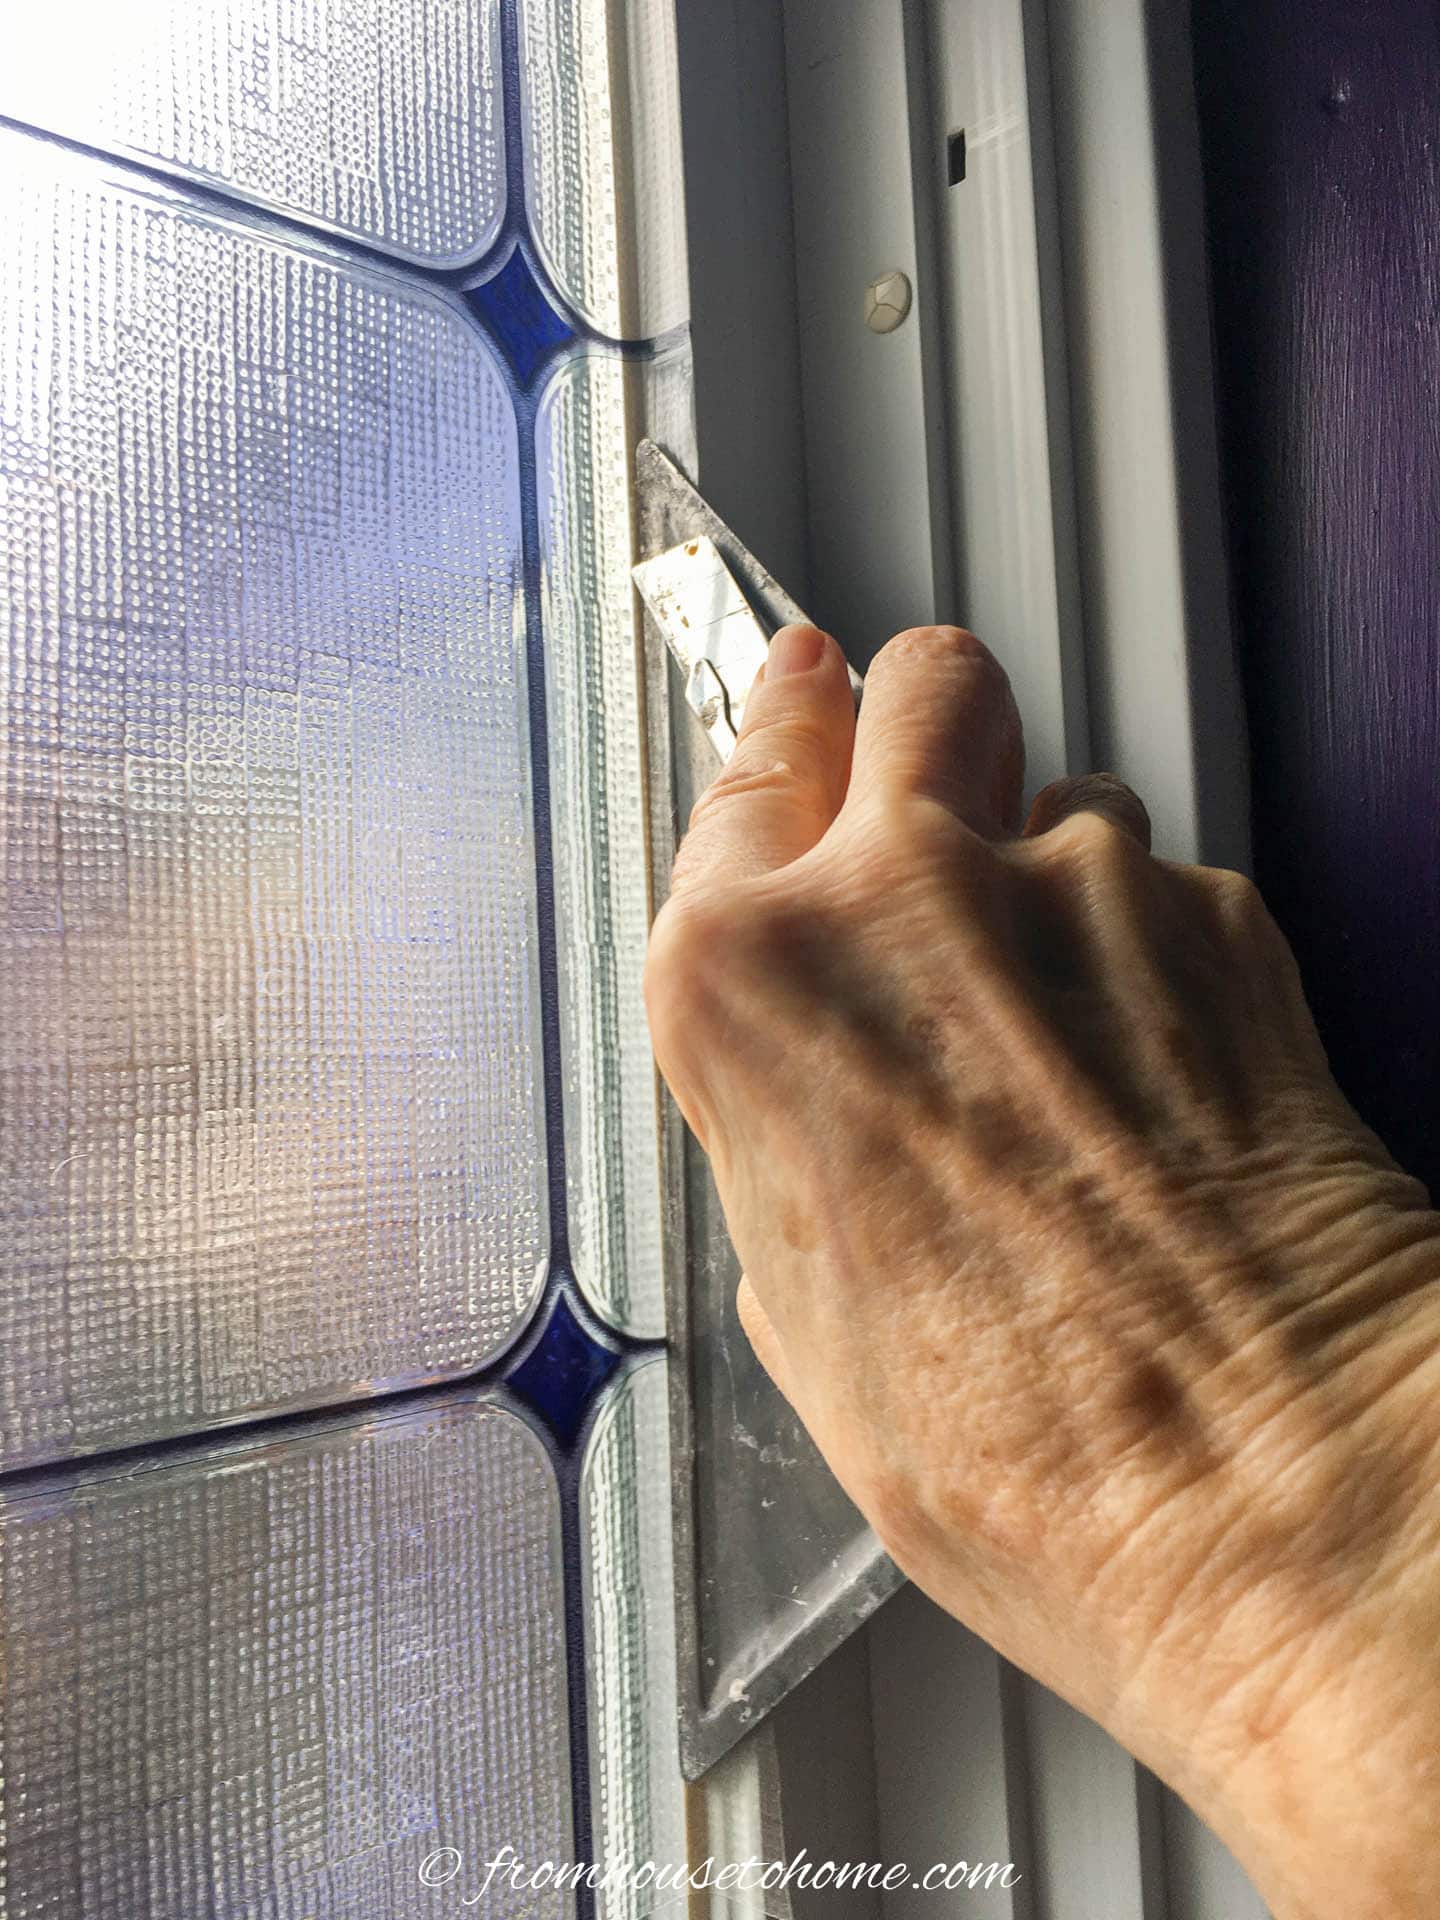 Utility knife cutting the adhesive window film along the edge of the window